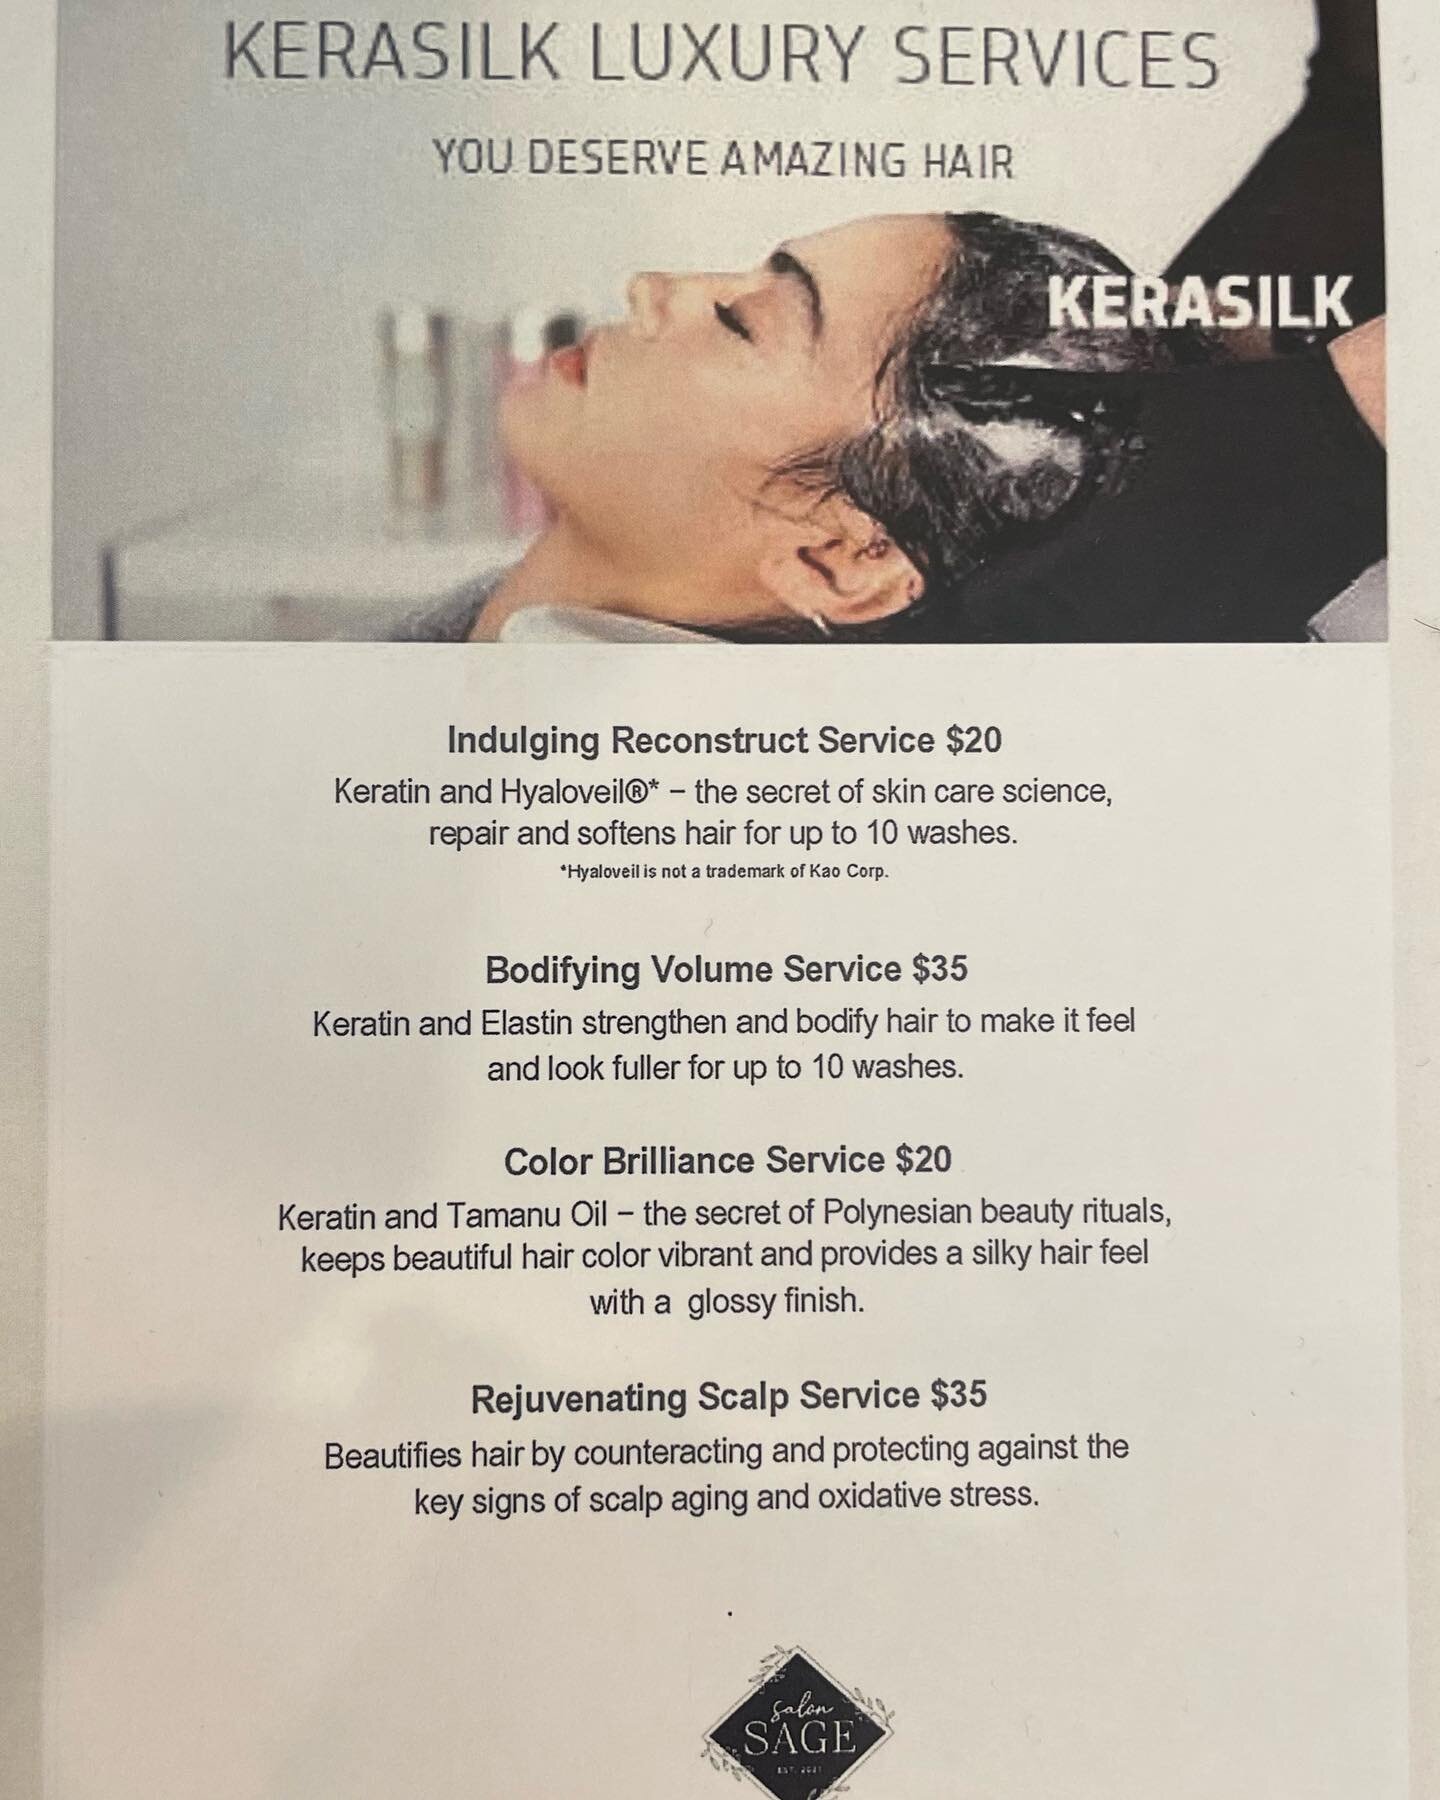 Add any of these luxury Kerasilk services to your appointment when you call! We have something for every head of hair out there! 

Call today at 856.624.9140 to book your appointment. ✨